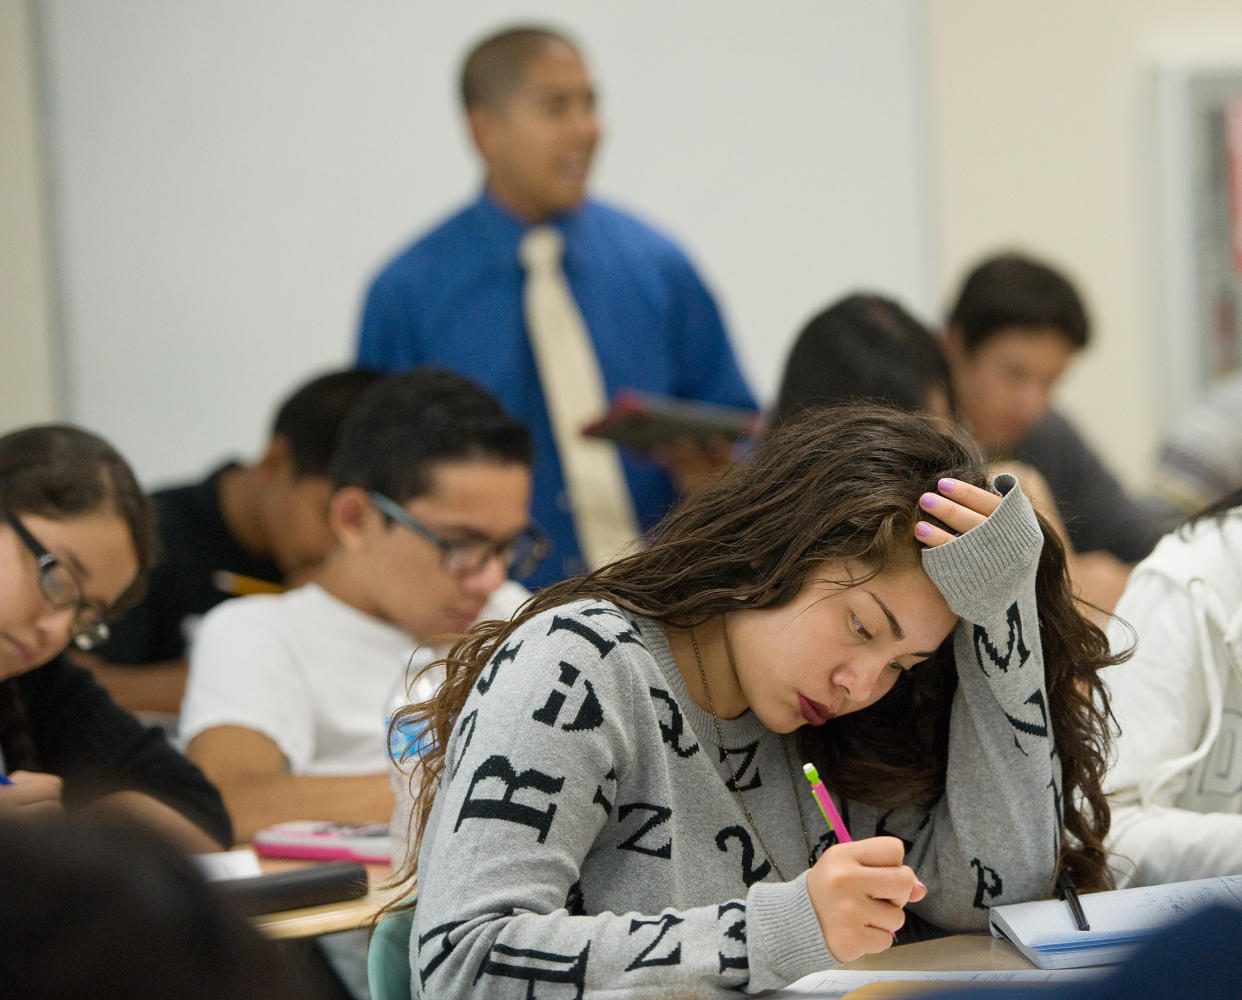 SANTA ANA, CA - SEPTEMBER 09: Jasmin Canada, 17, a senior at Godinez Fundamental High School in Santa Ana, works a math problem while teacher John Ninofranco, in back, instructs her AP Calculus class.



///ADDITIONAL INFORMATION:   √ê MINDY SCHAUER, ORANGE COUNTY REGISTER √ê

shot 090914

ap.santaana.0910

Santa Ana schools are trying to increase scores and performance in Advanced Placement classes by teaming with The College Board. Godinez High School teacher John Ninofranco teaches his  AP Calculus class. (Photo by Mindy Schauer/Digital First Media/Orange County Register via Getty Images)